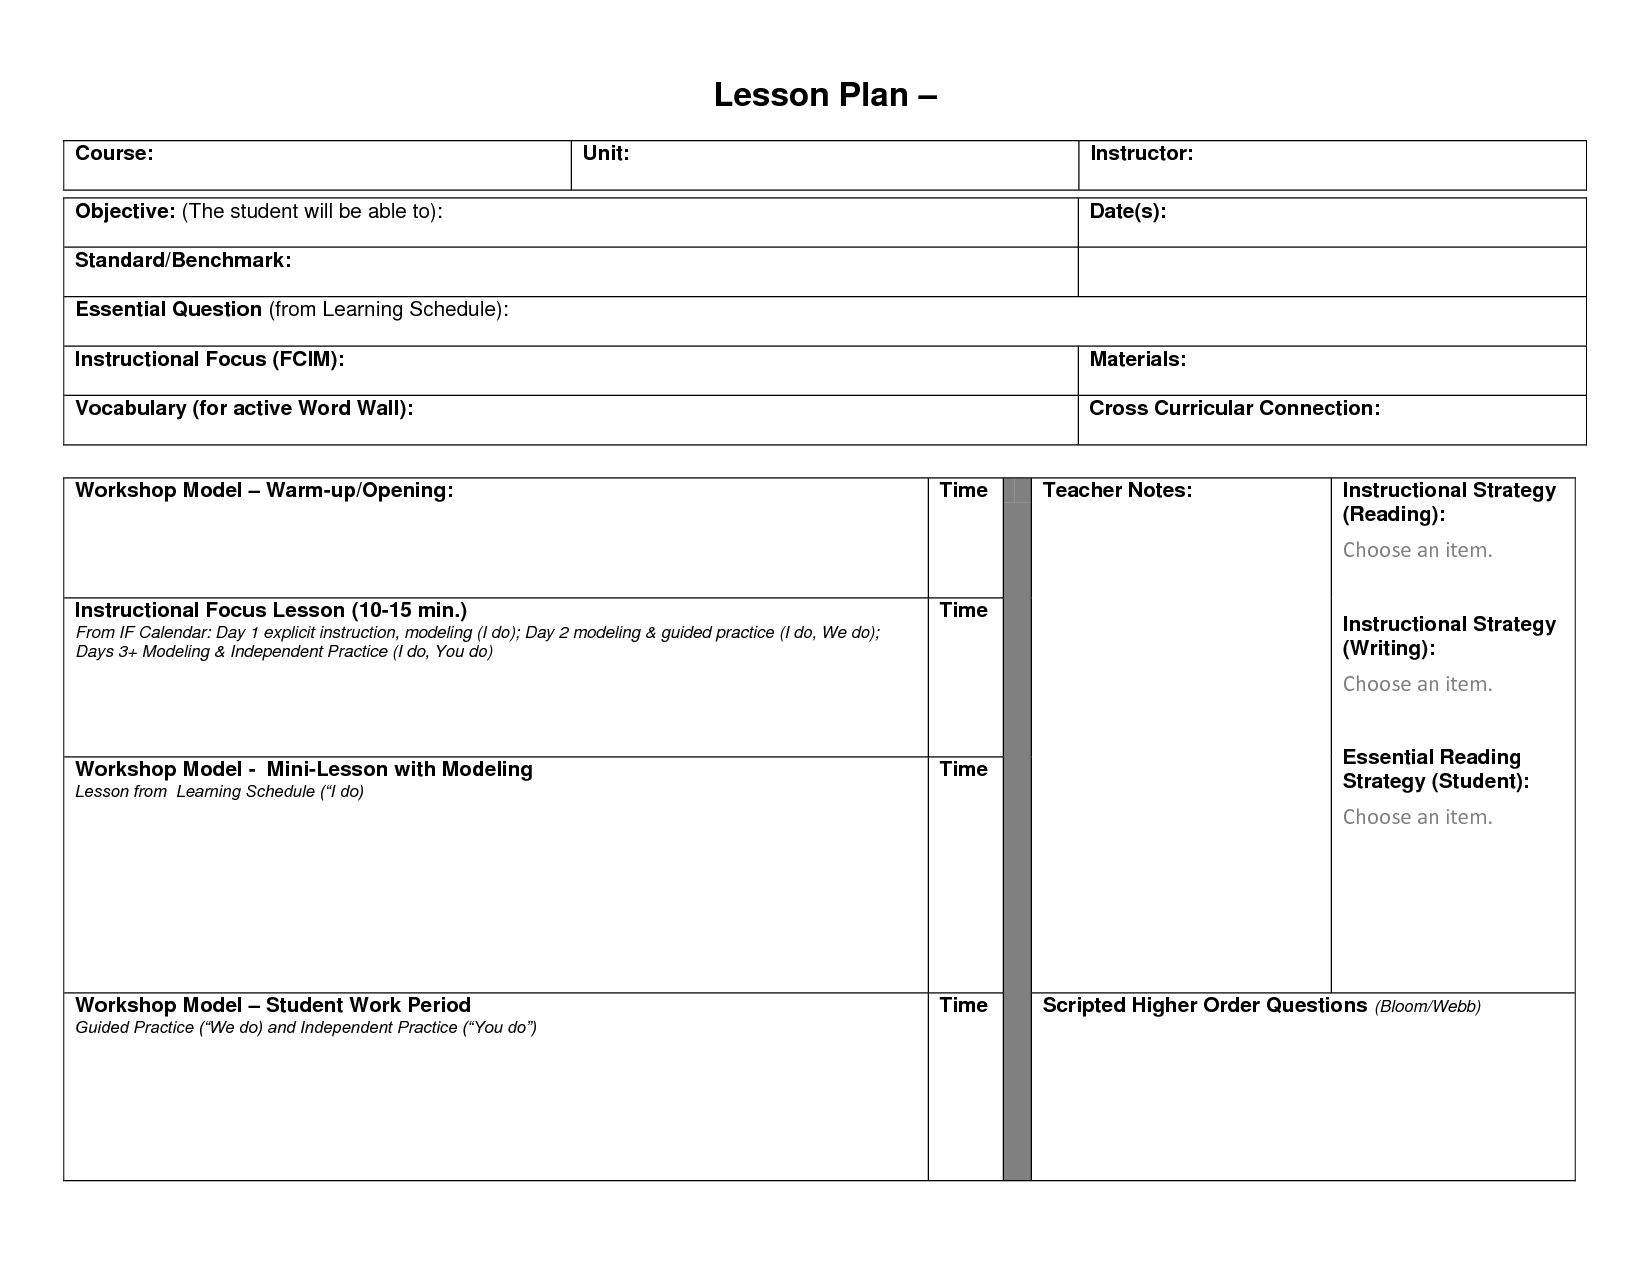 Blank Lesson Plan Format Template | Blank Lesson Template Throughout Blank Unit Lesson Plan Template